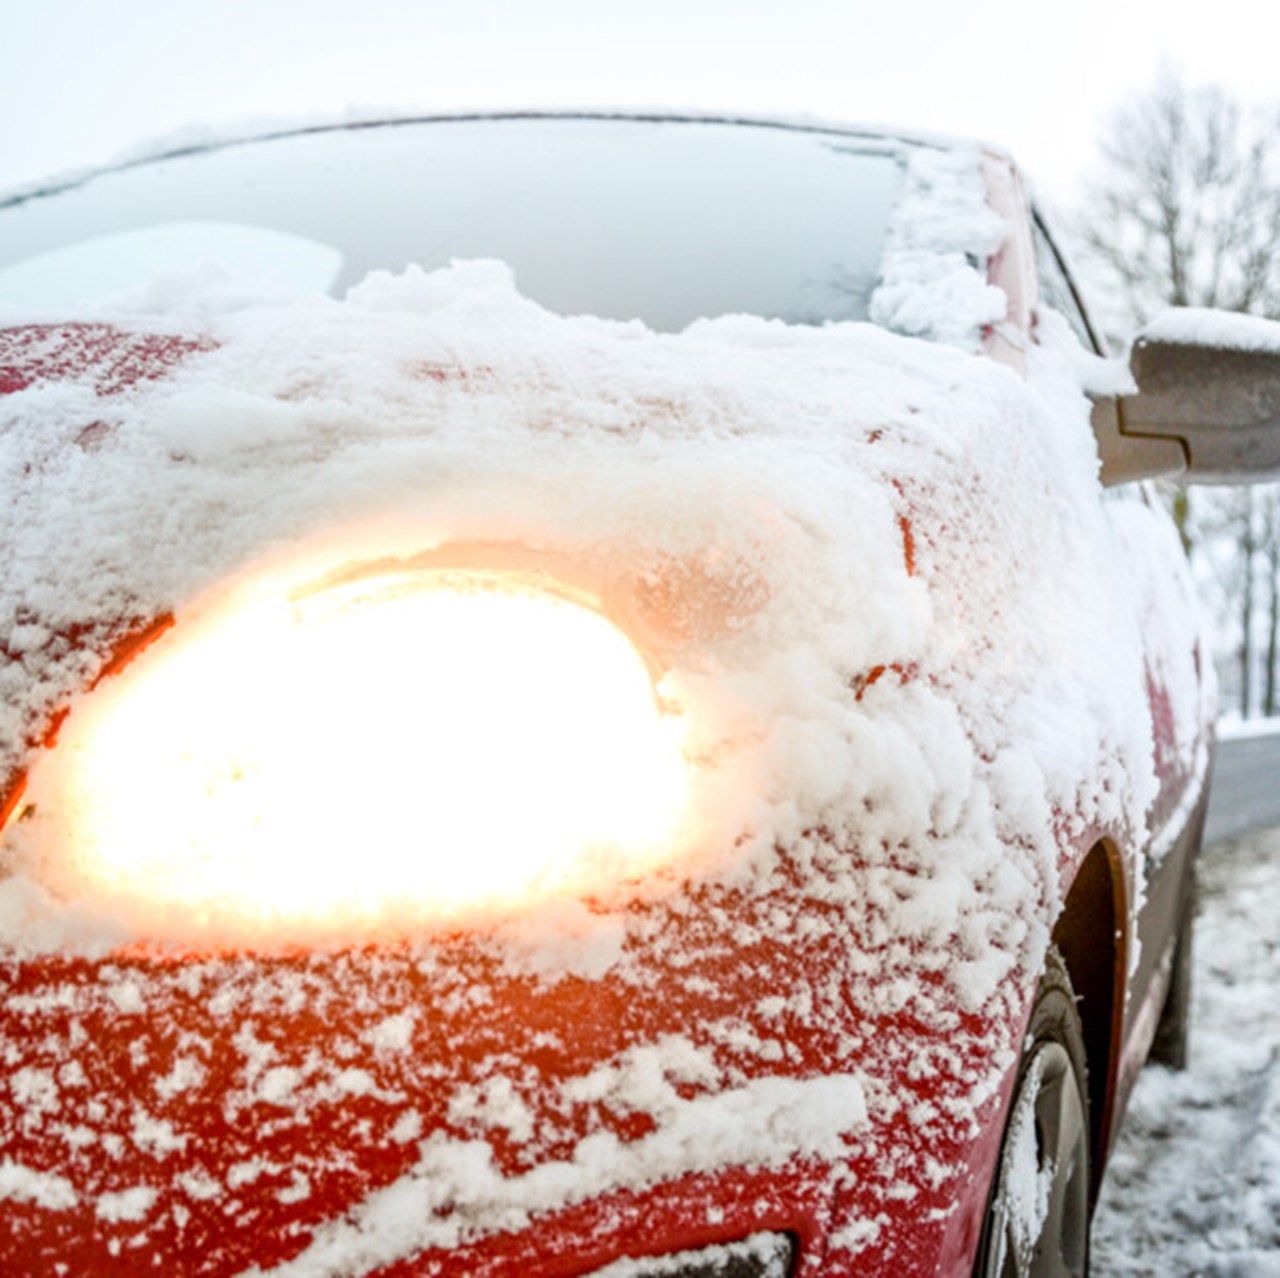 he headlight is on and shines through the ice of a snow-covered red car